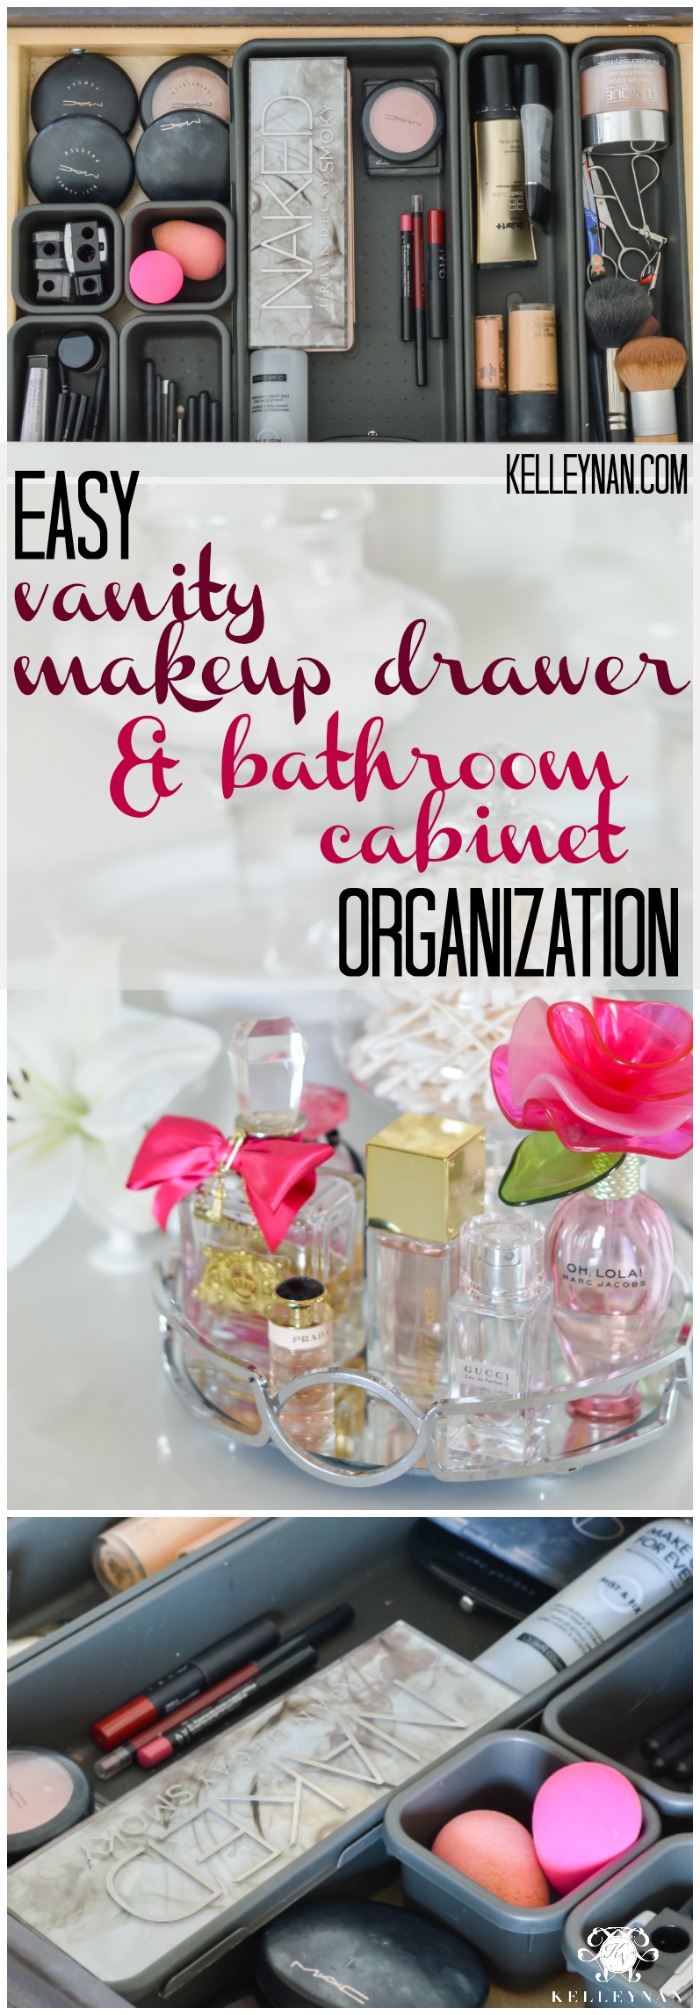 https://kelleynan.com/wp-content/uploads/2017/01/Organized-Bathroom-Drawers-with-Makeup-and-Under-Sink-Cabinet.jpg